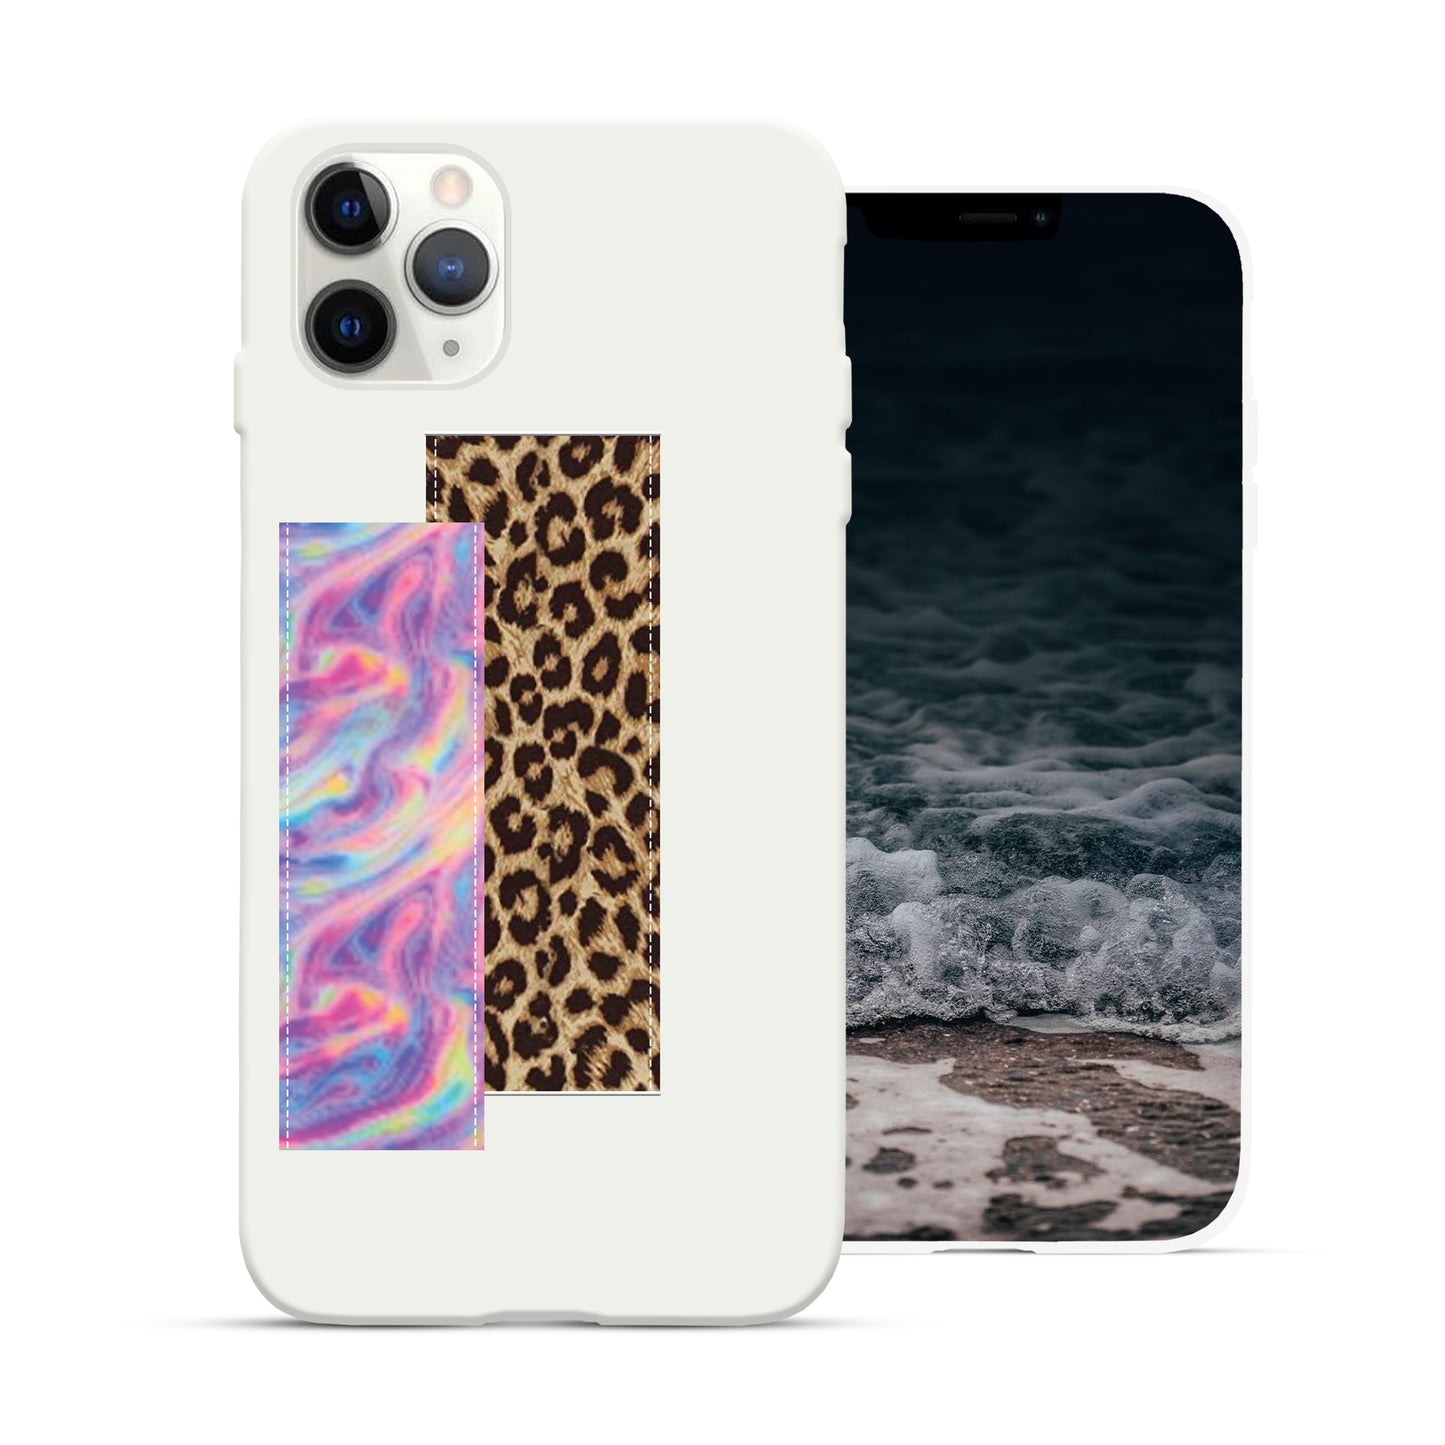 Finger Loop Phone Case For iPhone 11 Pro Max White With Custom Strap